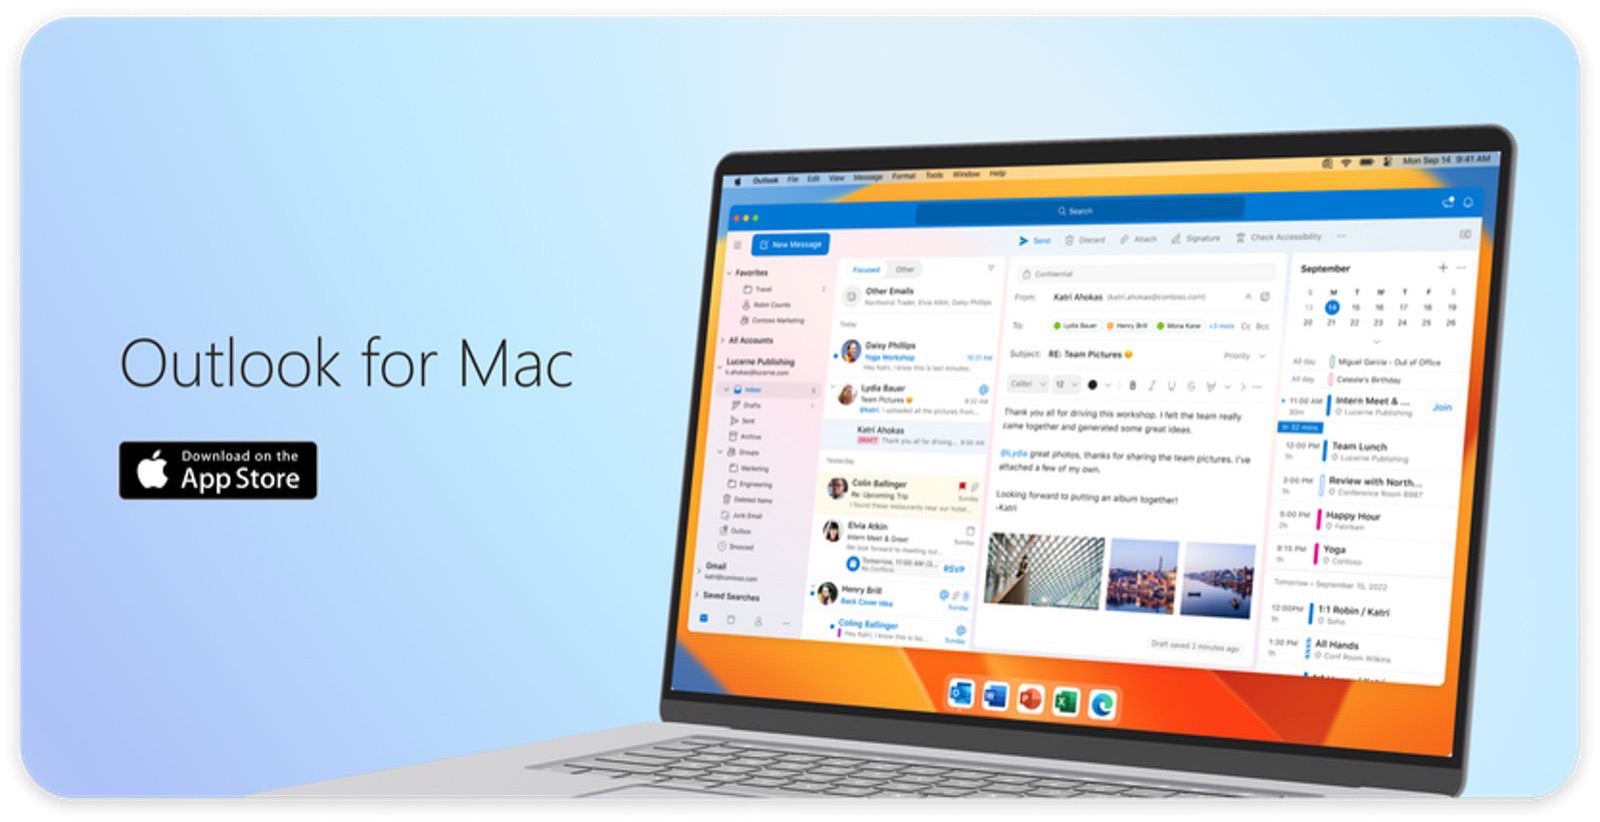 Outlook for mac is now free